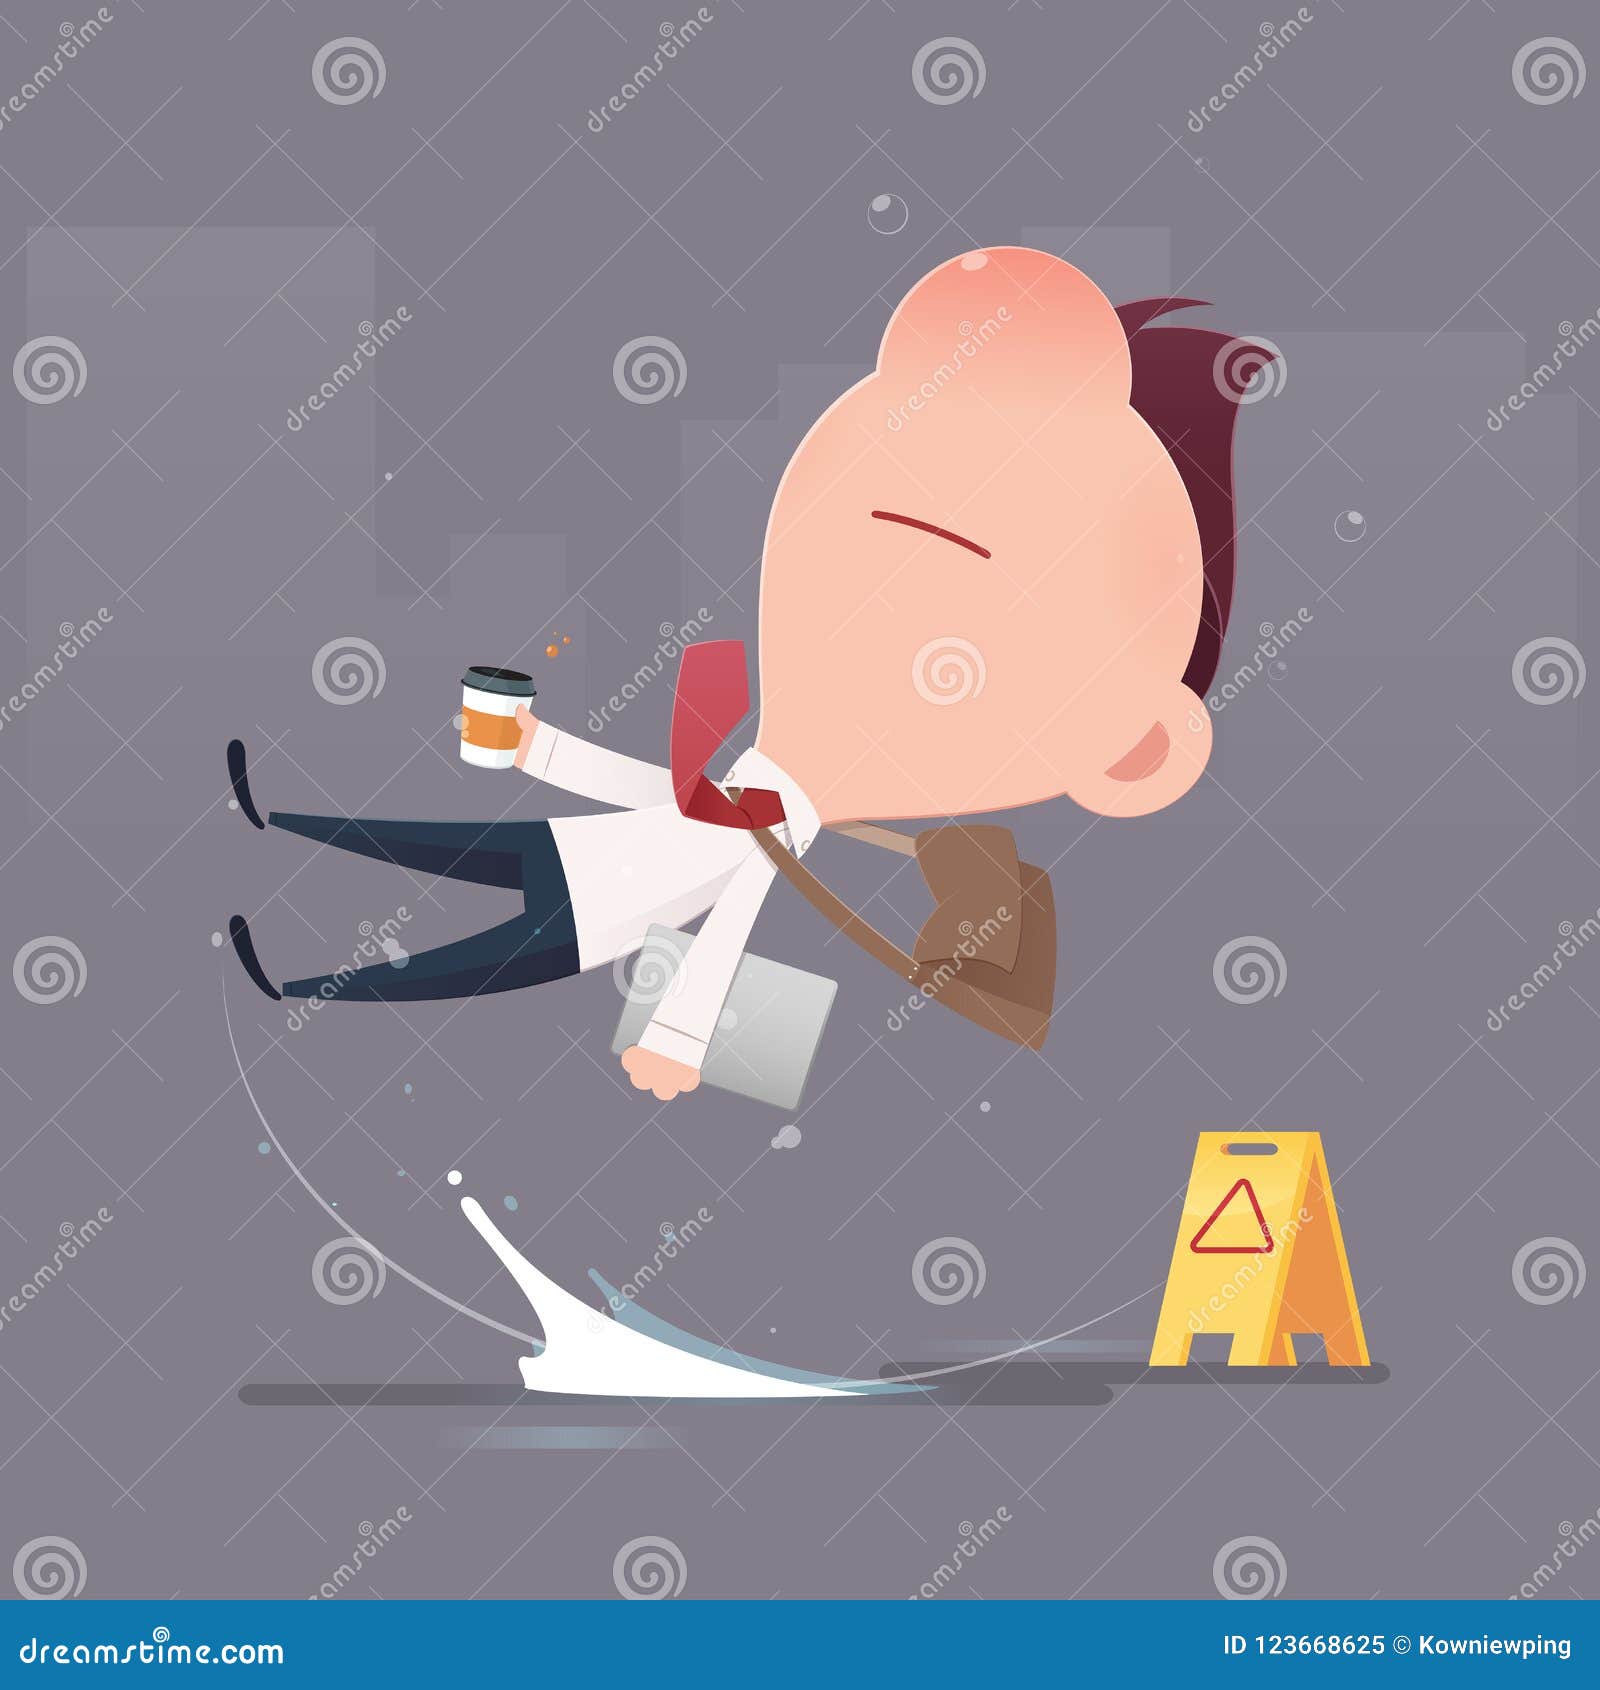 businessman character slipped on a water puddle.